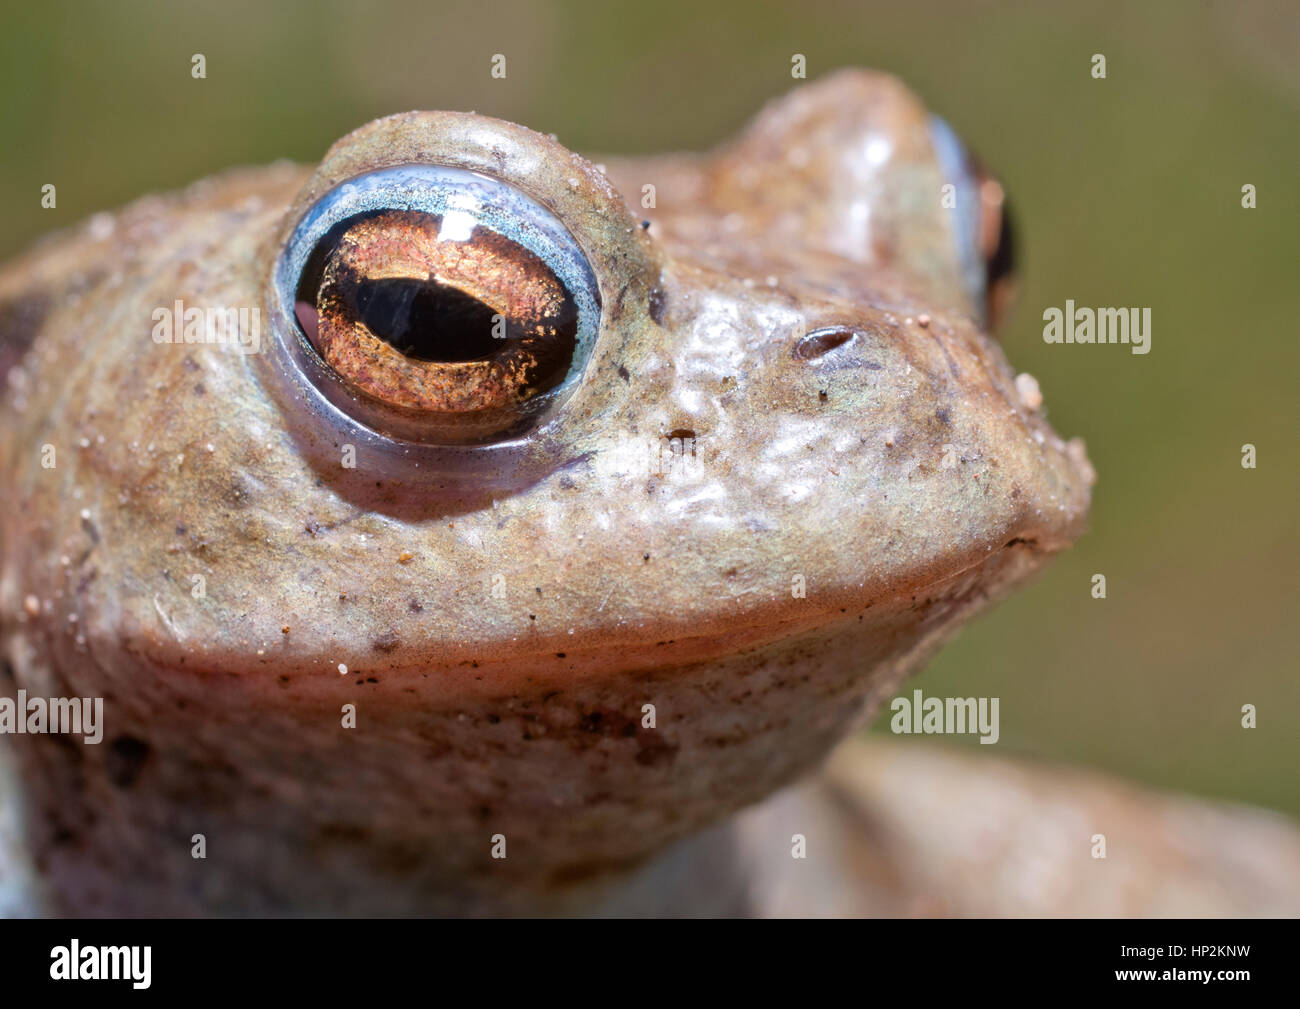 A frog during a morning in the long grass beside a pond trying to find shelter from the sun which has risen in the sky as the temperature rises. Stock Photo